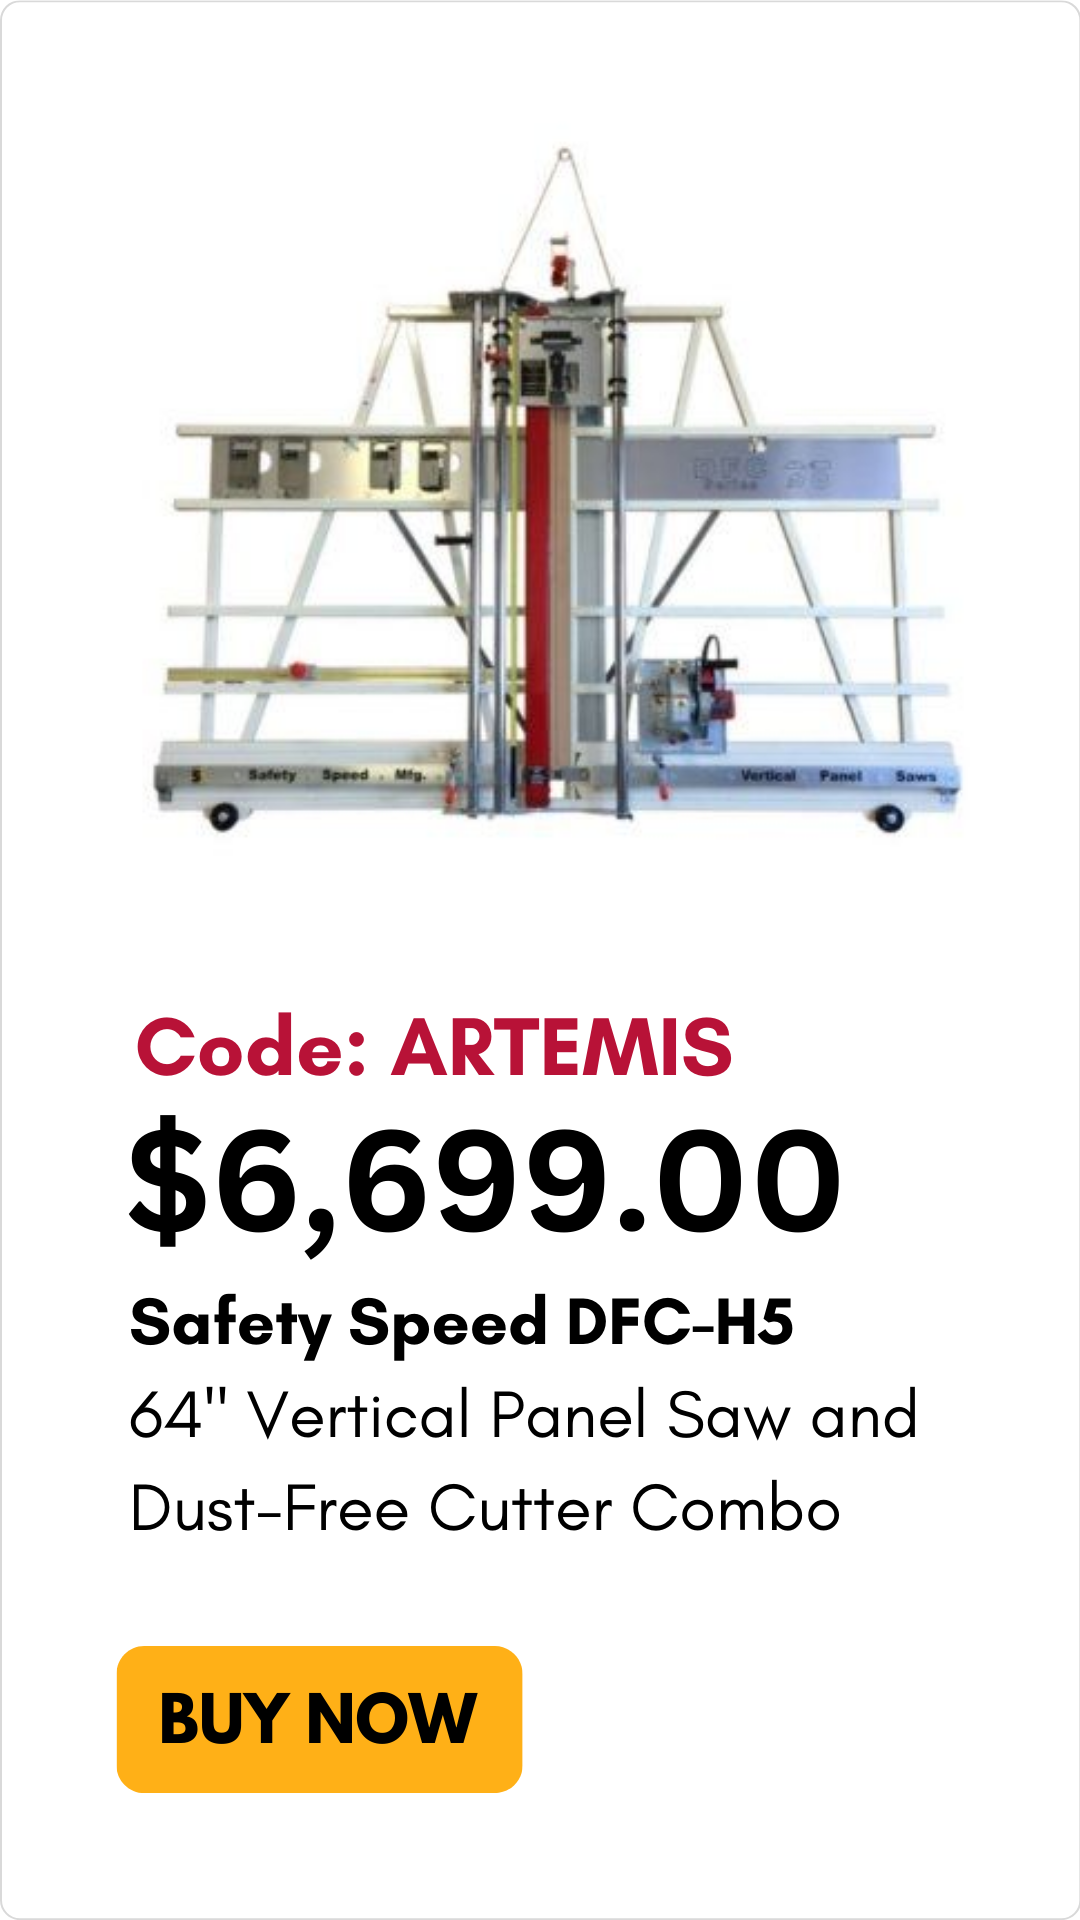 Safety Speed DFC-H5 64" Vertical Panel Saw and Dust Free Cutter Combo with code ARTEMIS